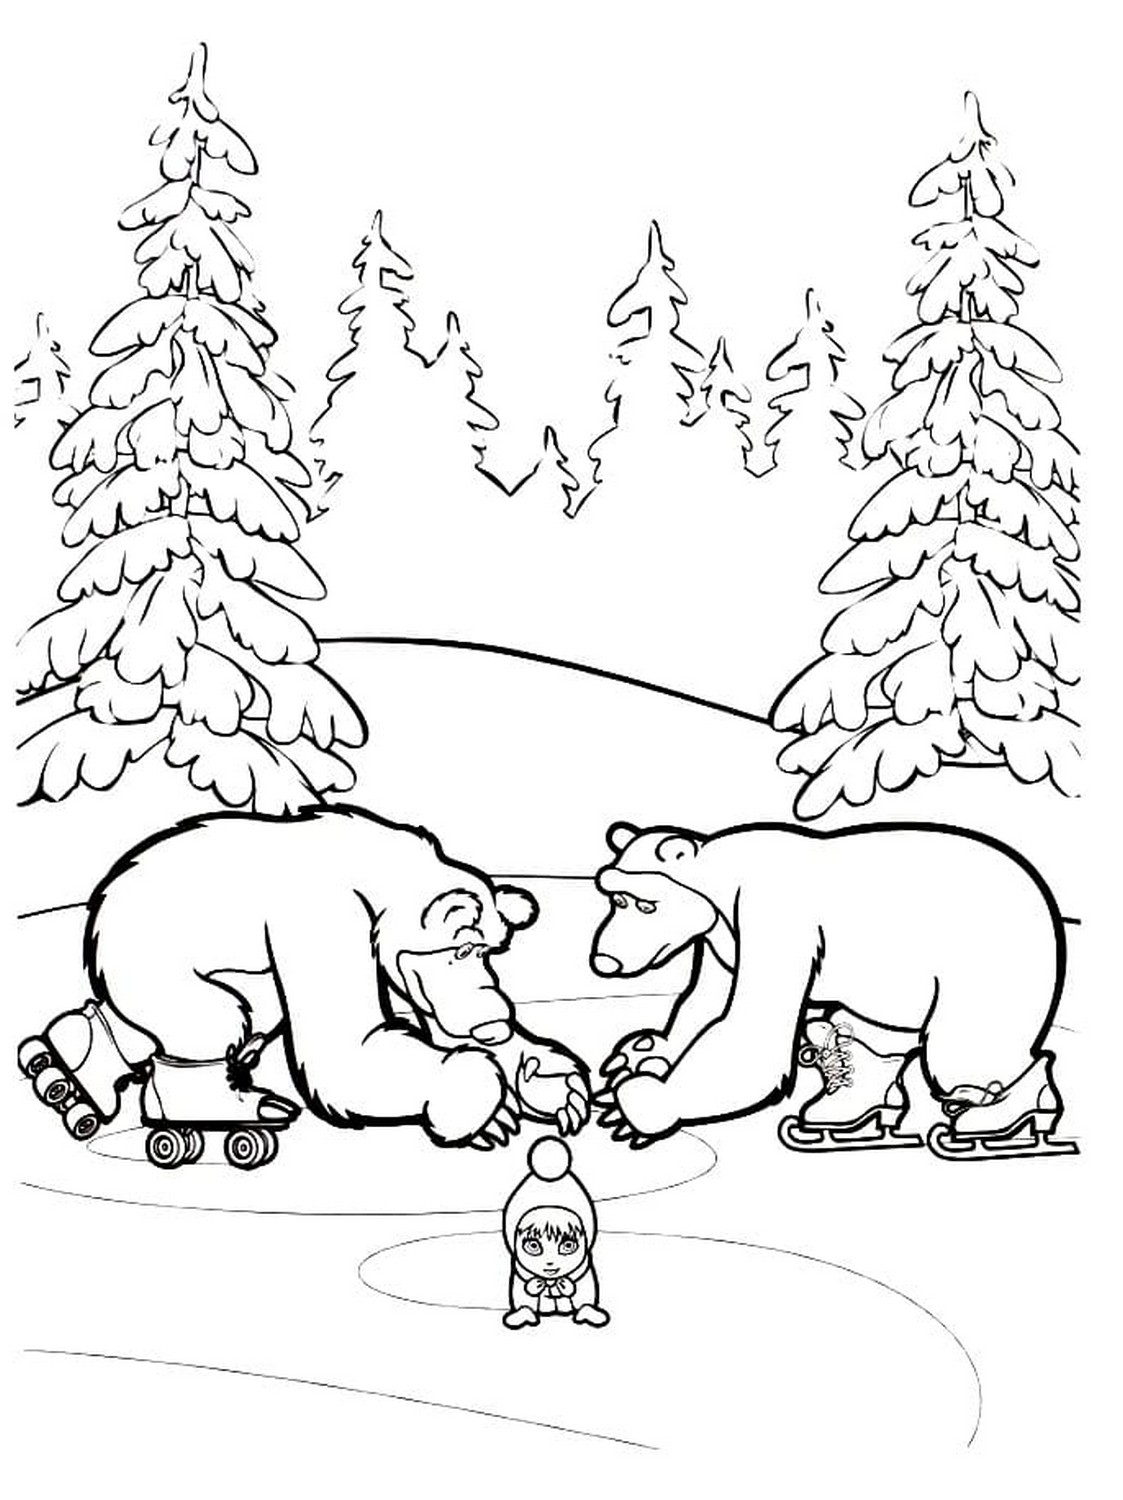 Masha and the Bear 73  coloring pages to print and coloring